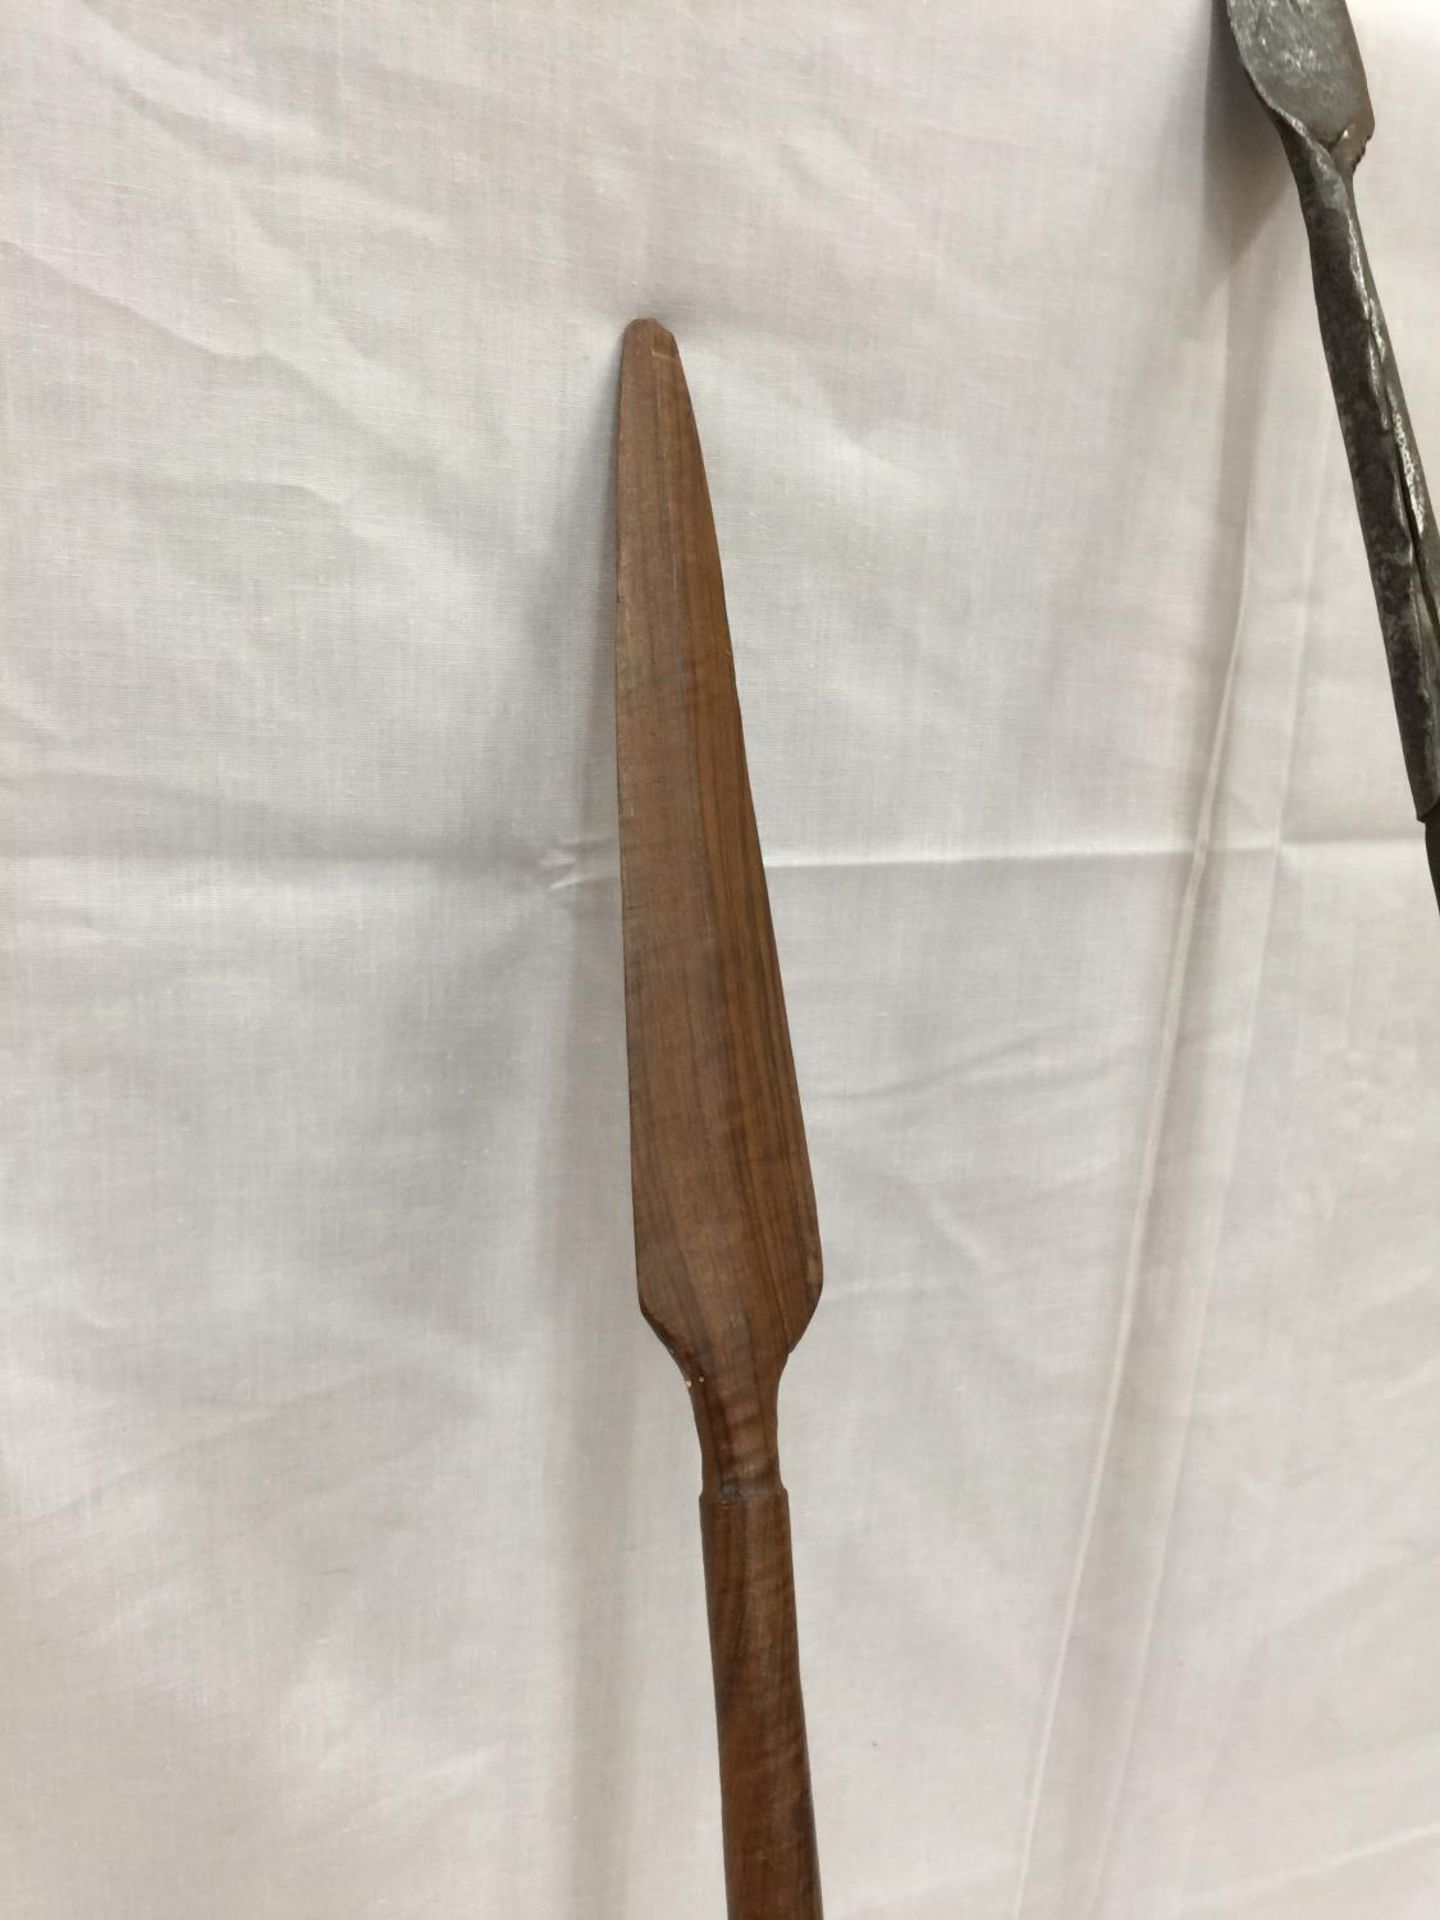 A VINTAGE 'HUNTING' SPEAR WITH METAL TIP LENGTH 150CM AND A WOODEN SPEAR LENGTH 118CM - Image 3 of 5